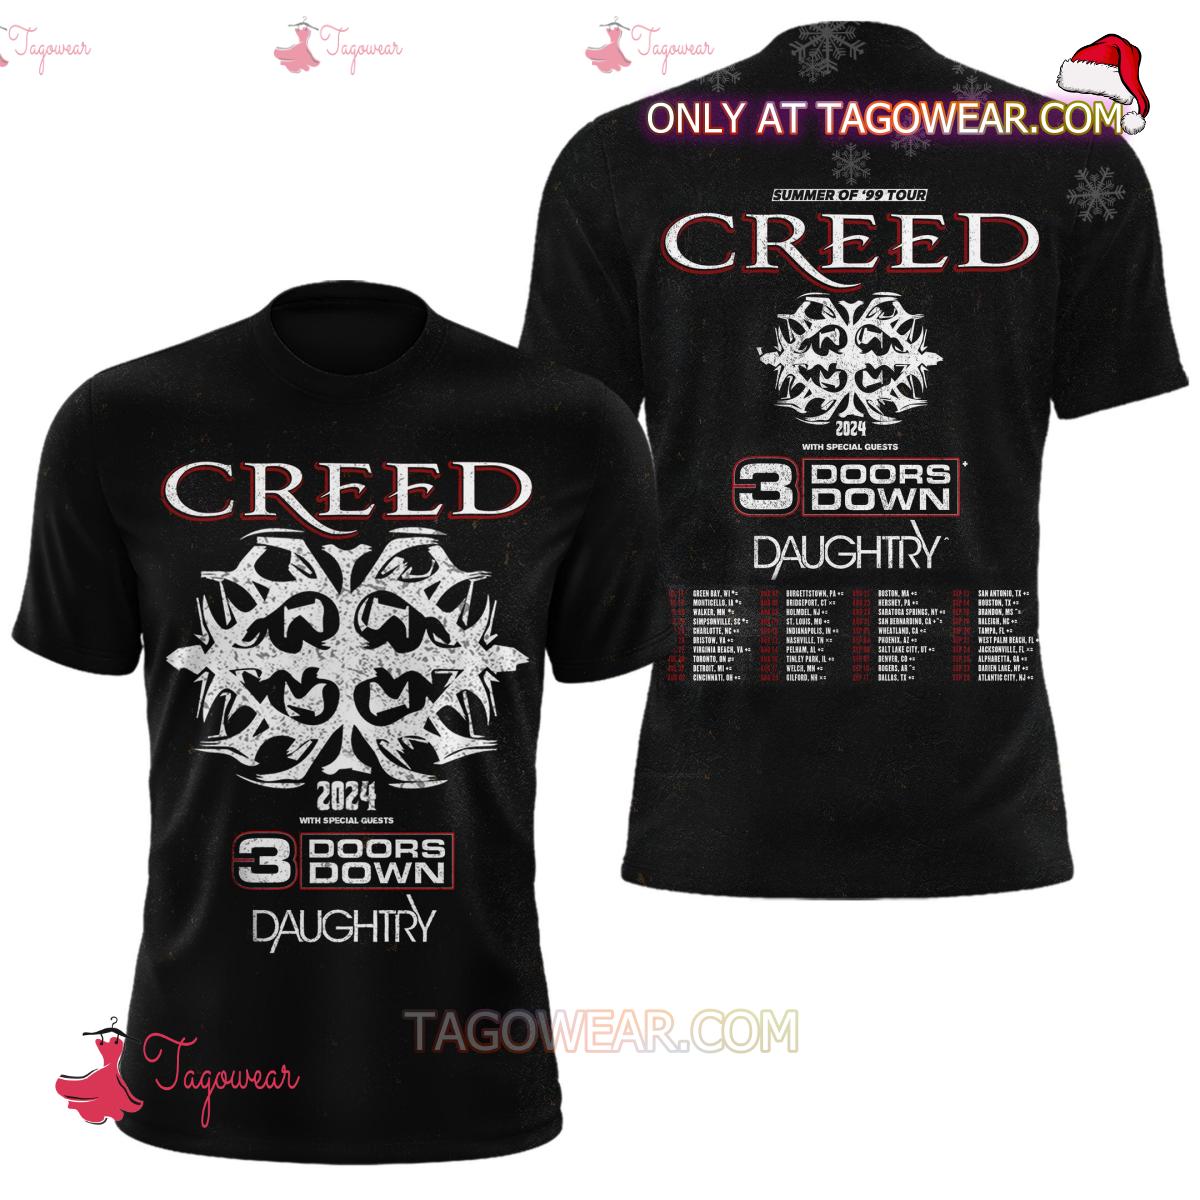 Creed Summer Of '99 Tour 2024 With 3 Doors Down Daughtry T-shirt, Hoodie c